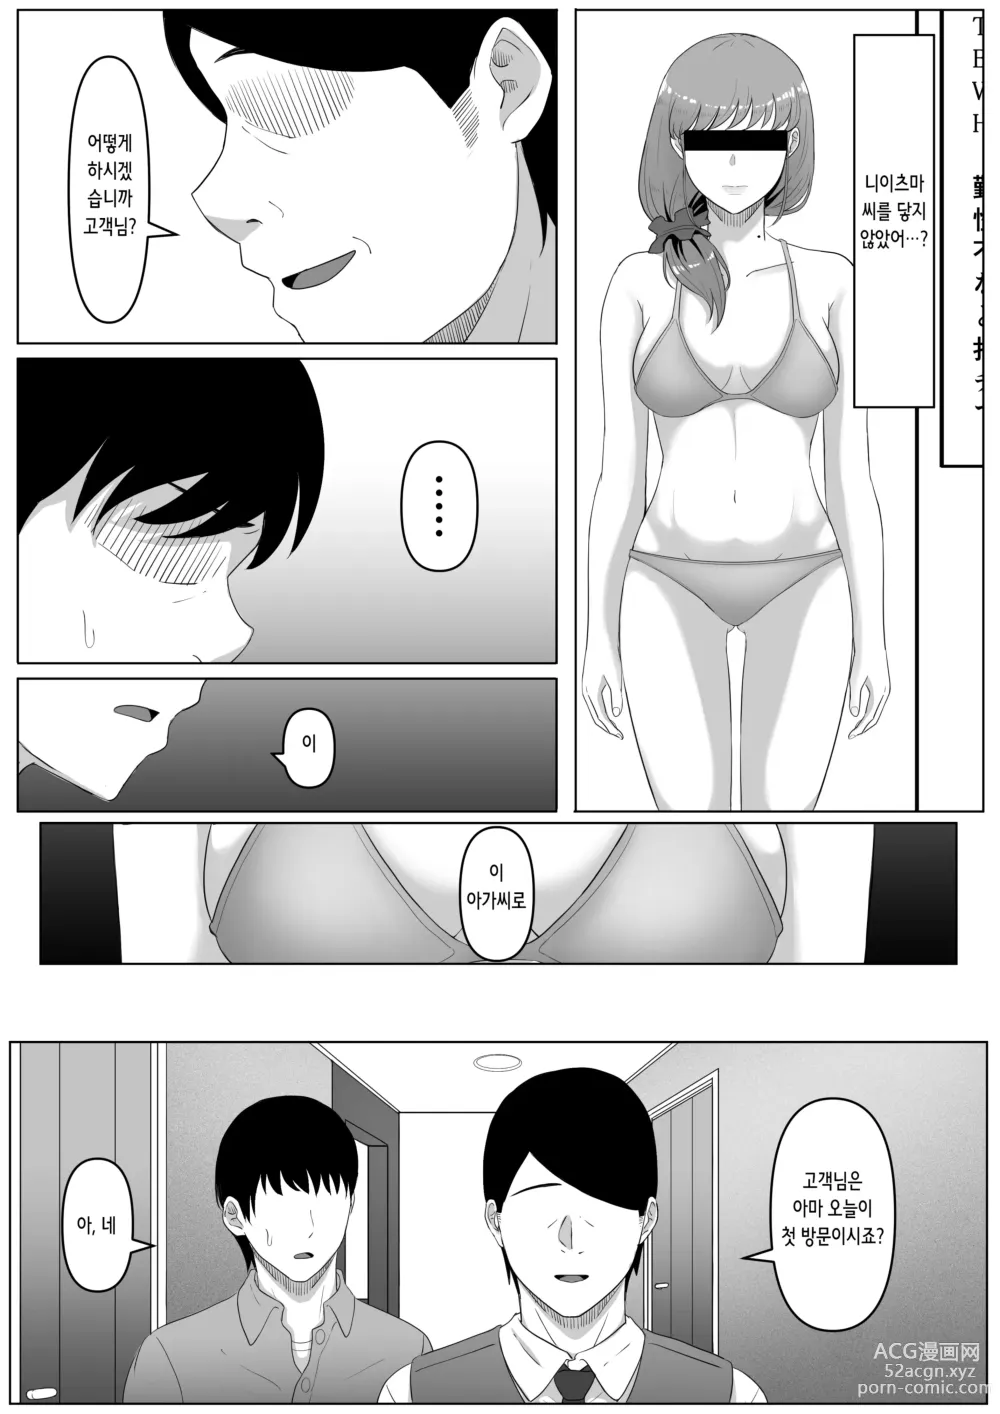 Page 11 of doujinshi 뒷구멍 변녀